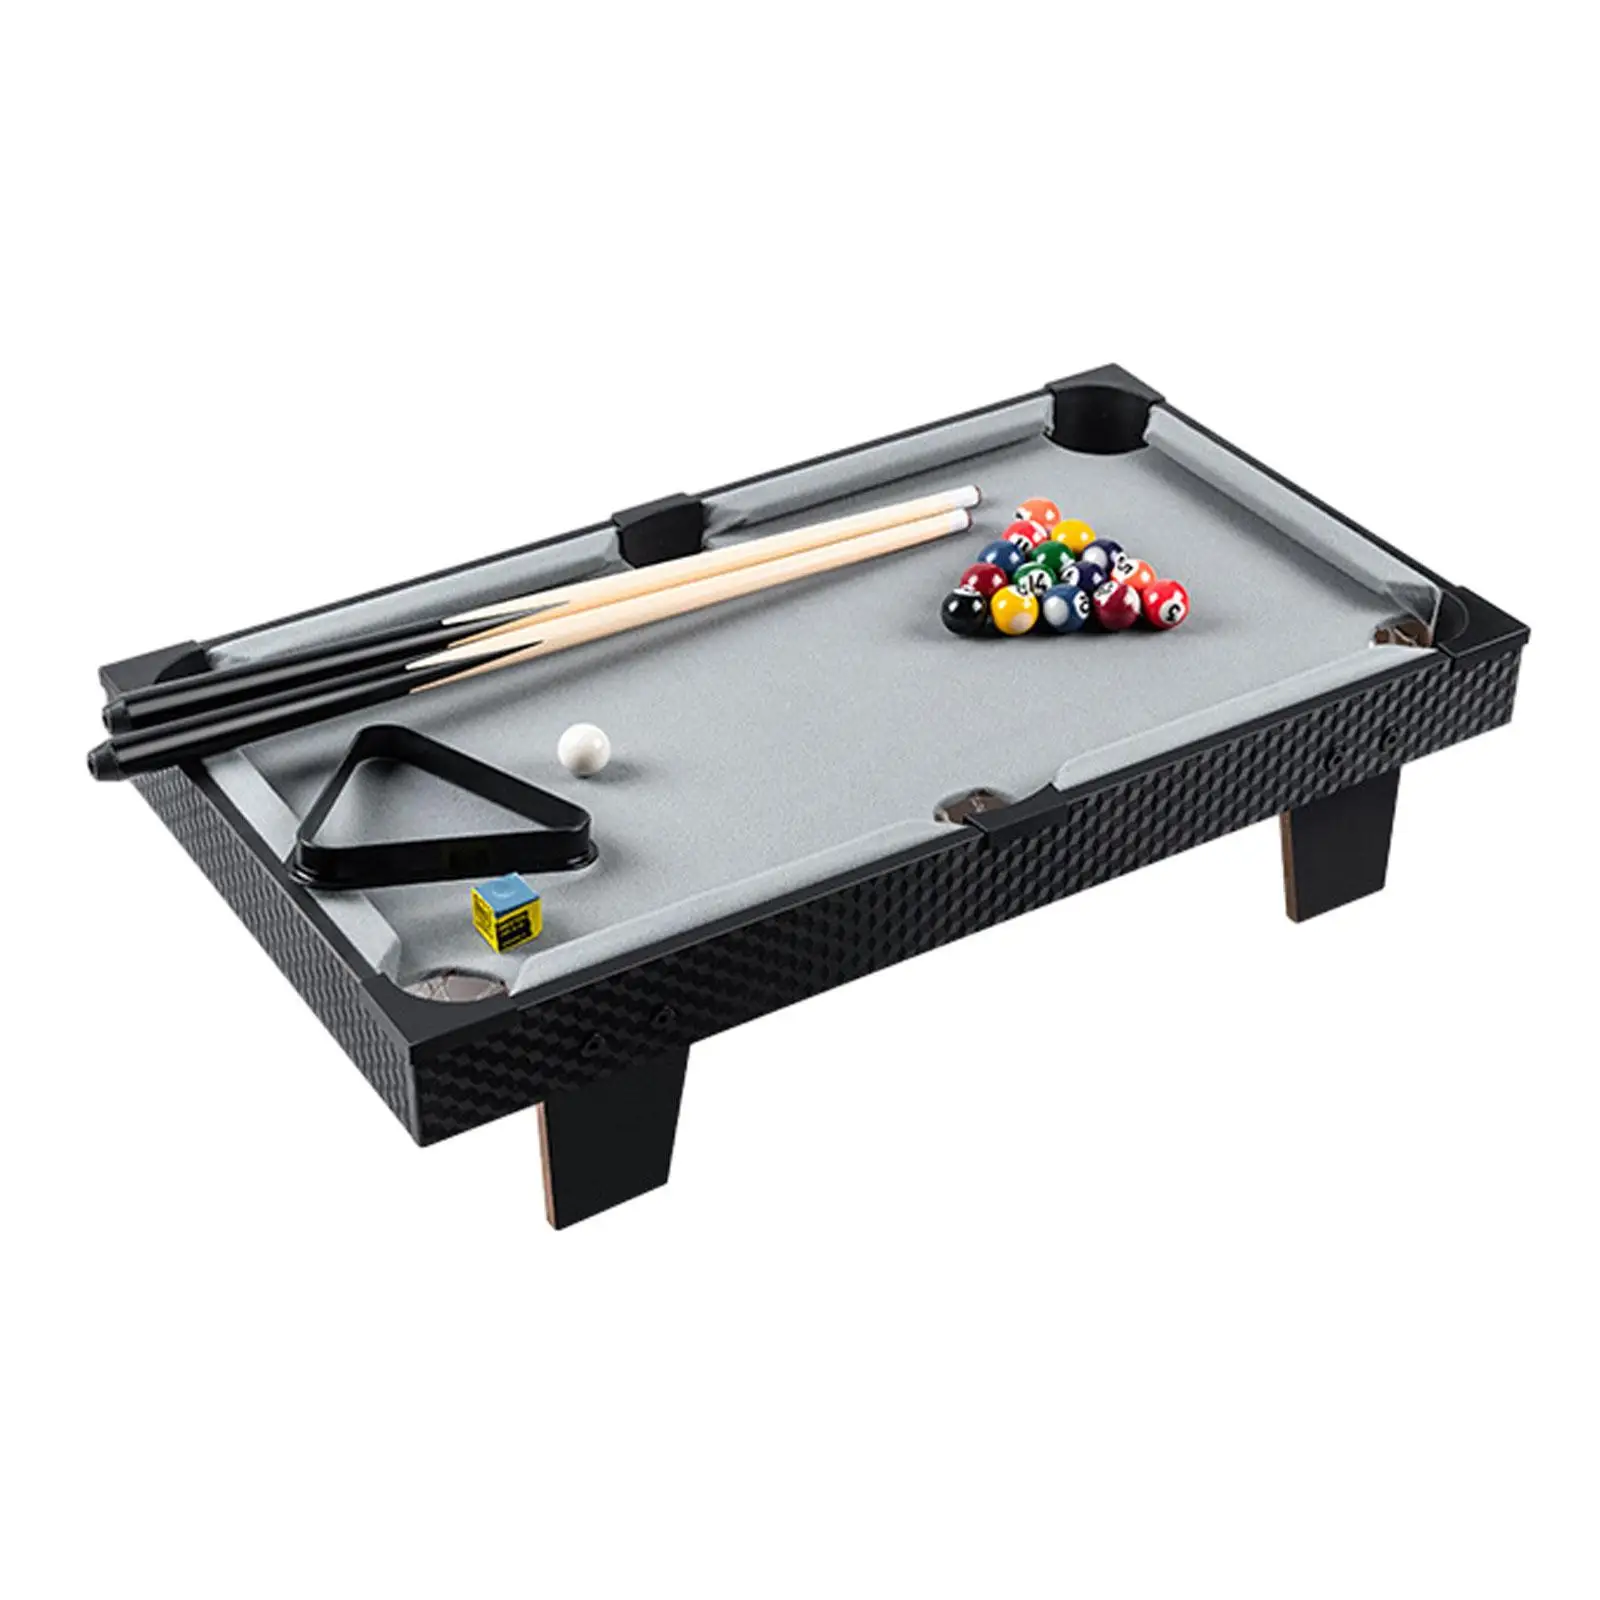 Premium Wooden Pool Table Set - Sturdy Tabletop Billiards for Family Fun